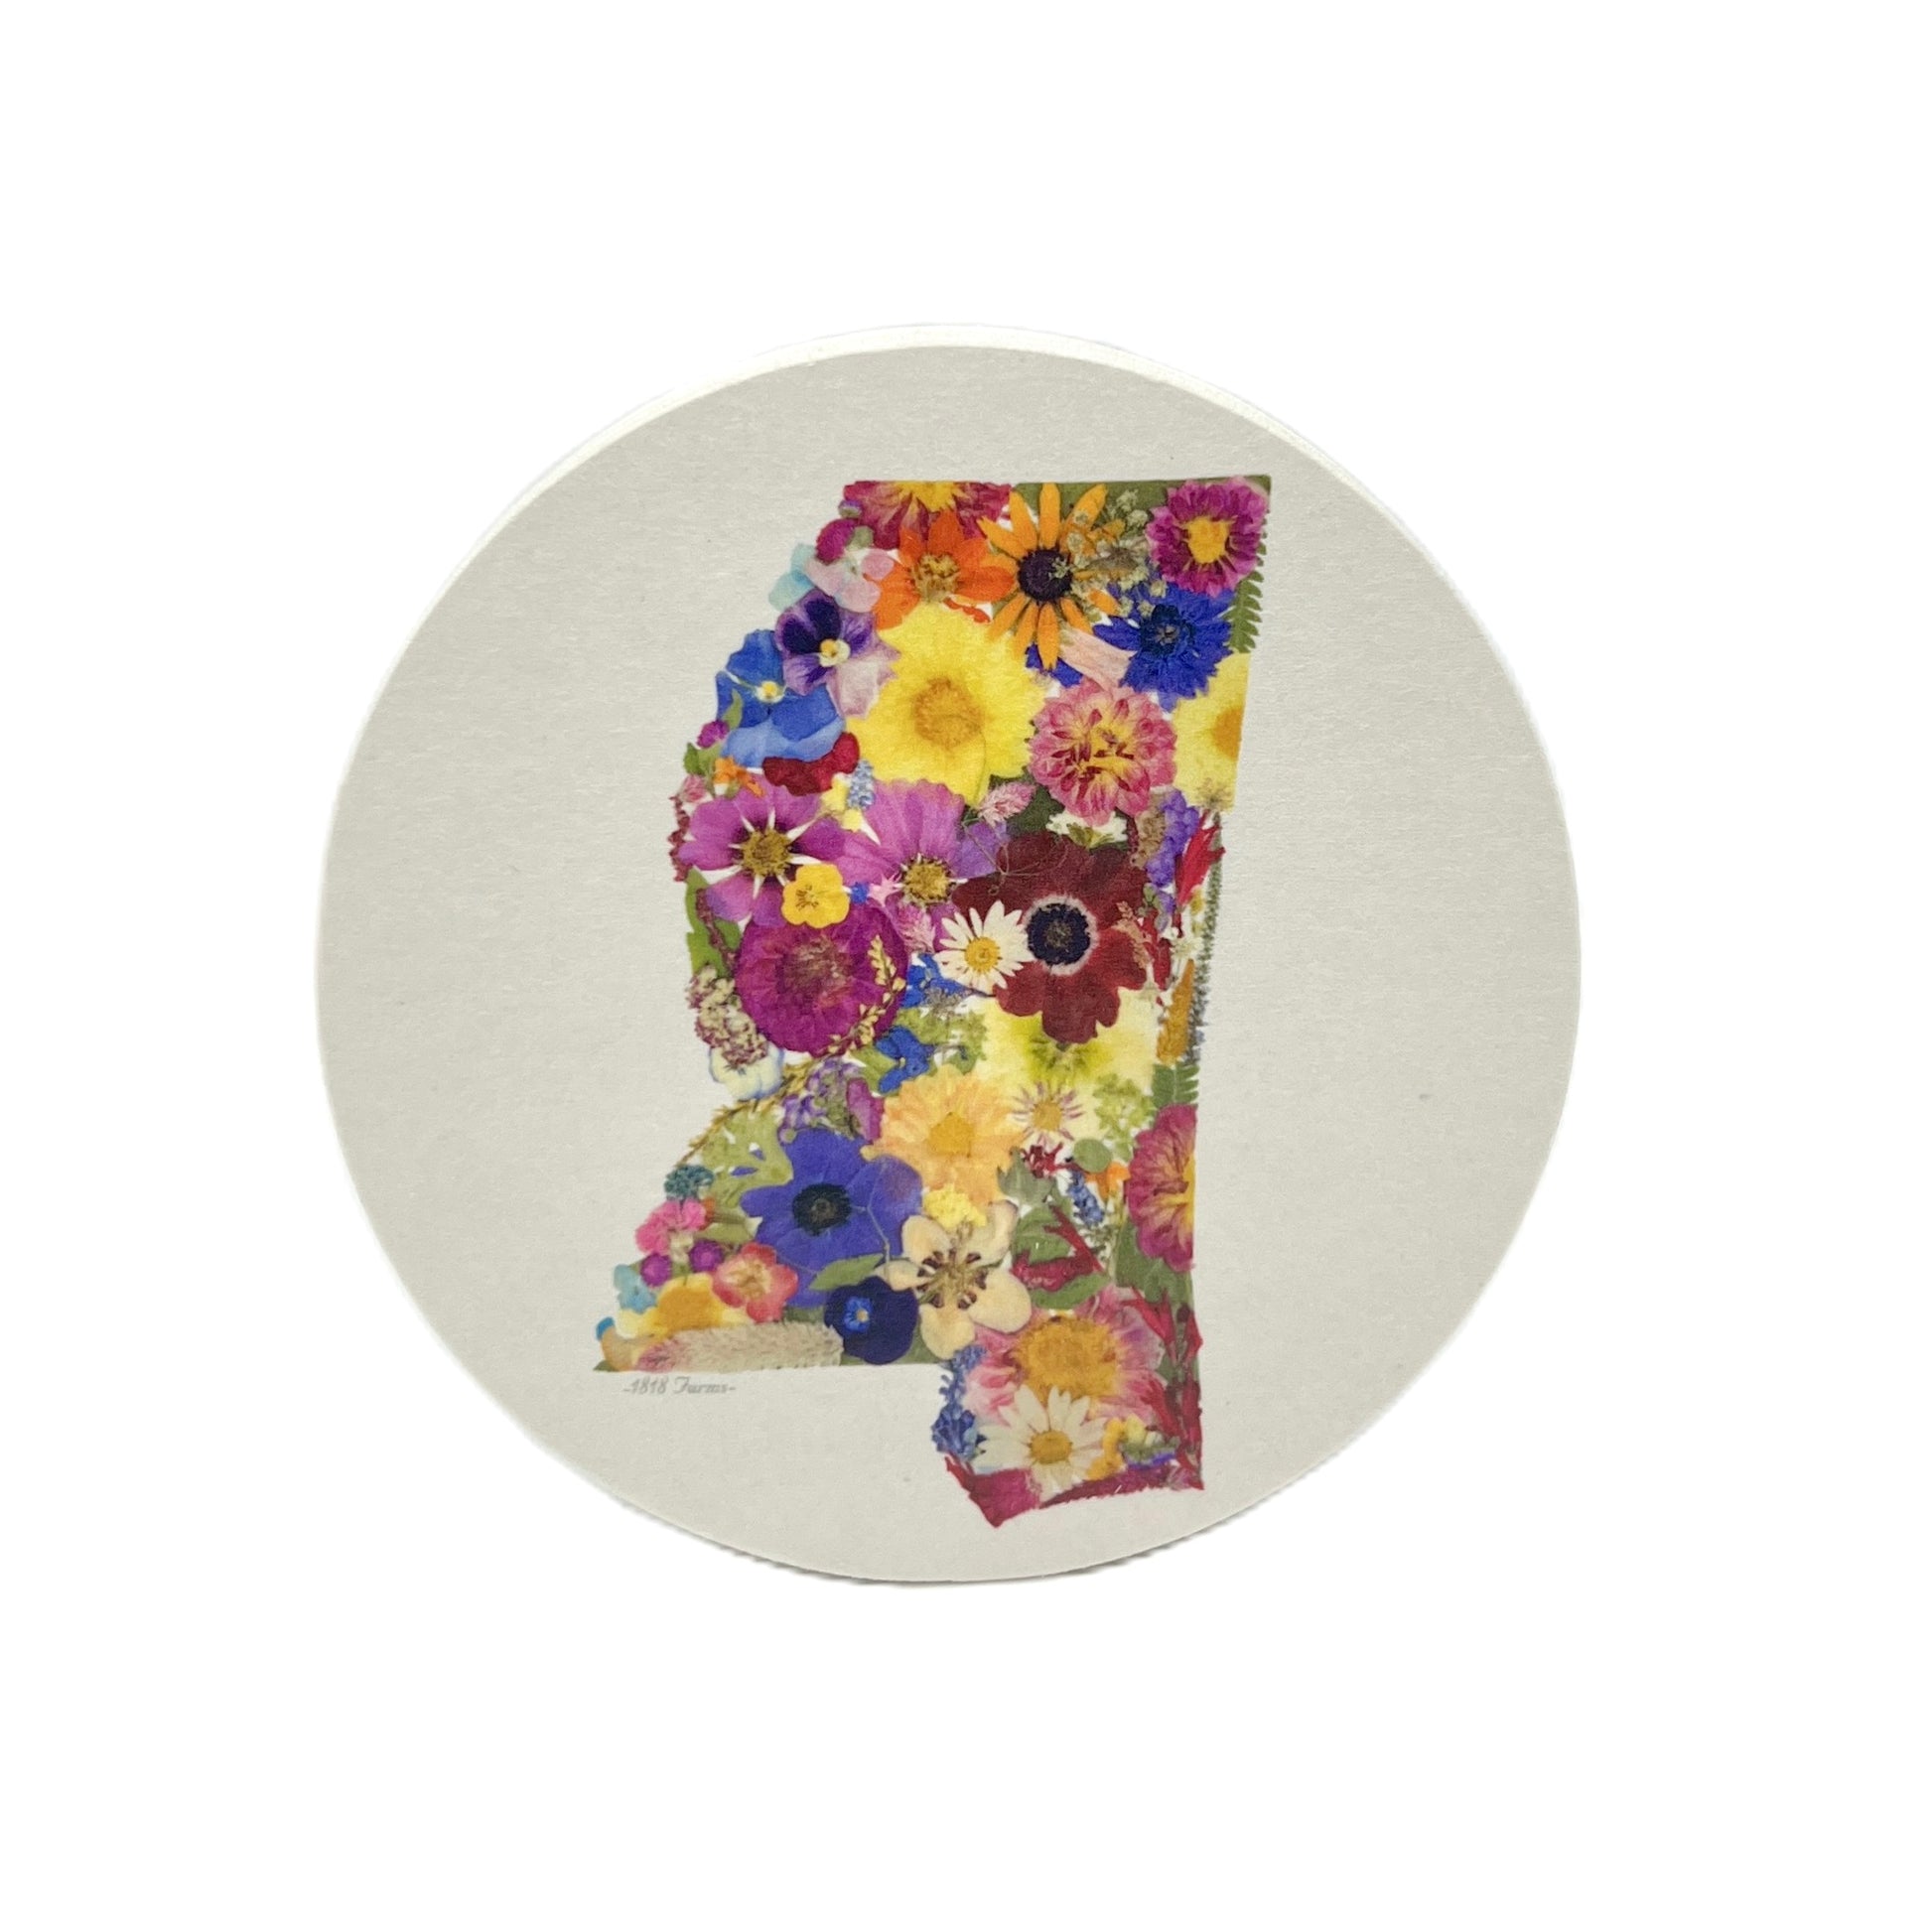 State Themed Drink Coasters (Set of 6)  - "Where I Bloom" Collection Coaster 1818 Farms Mississippi  